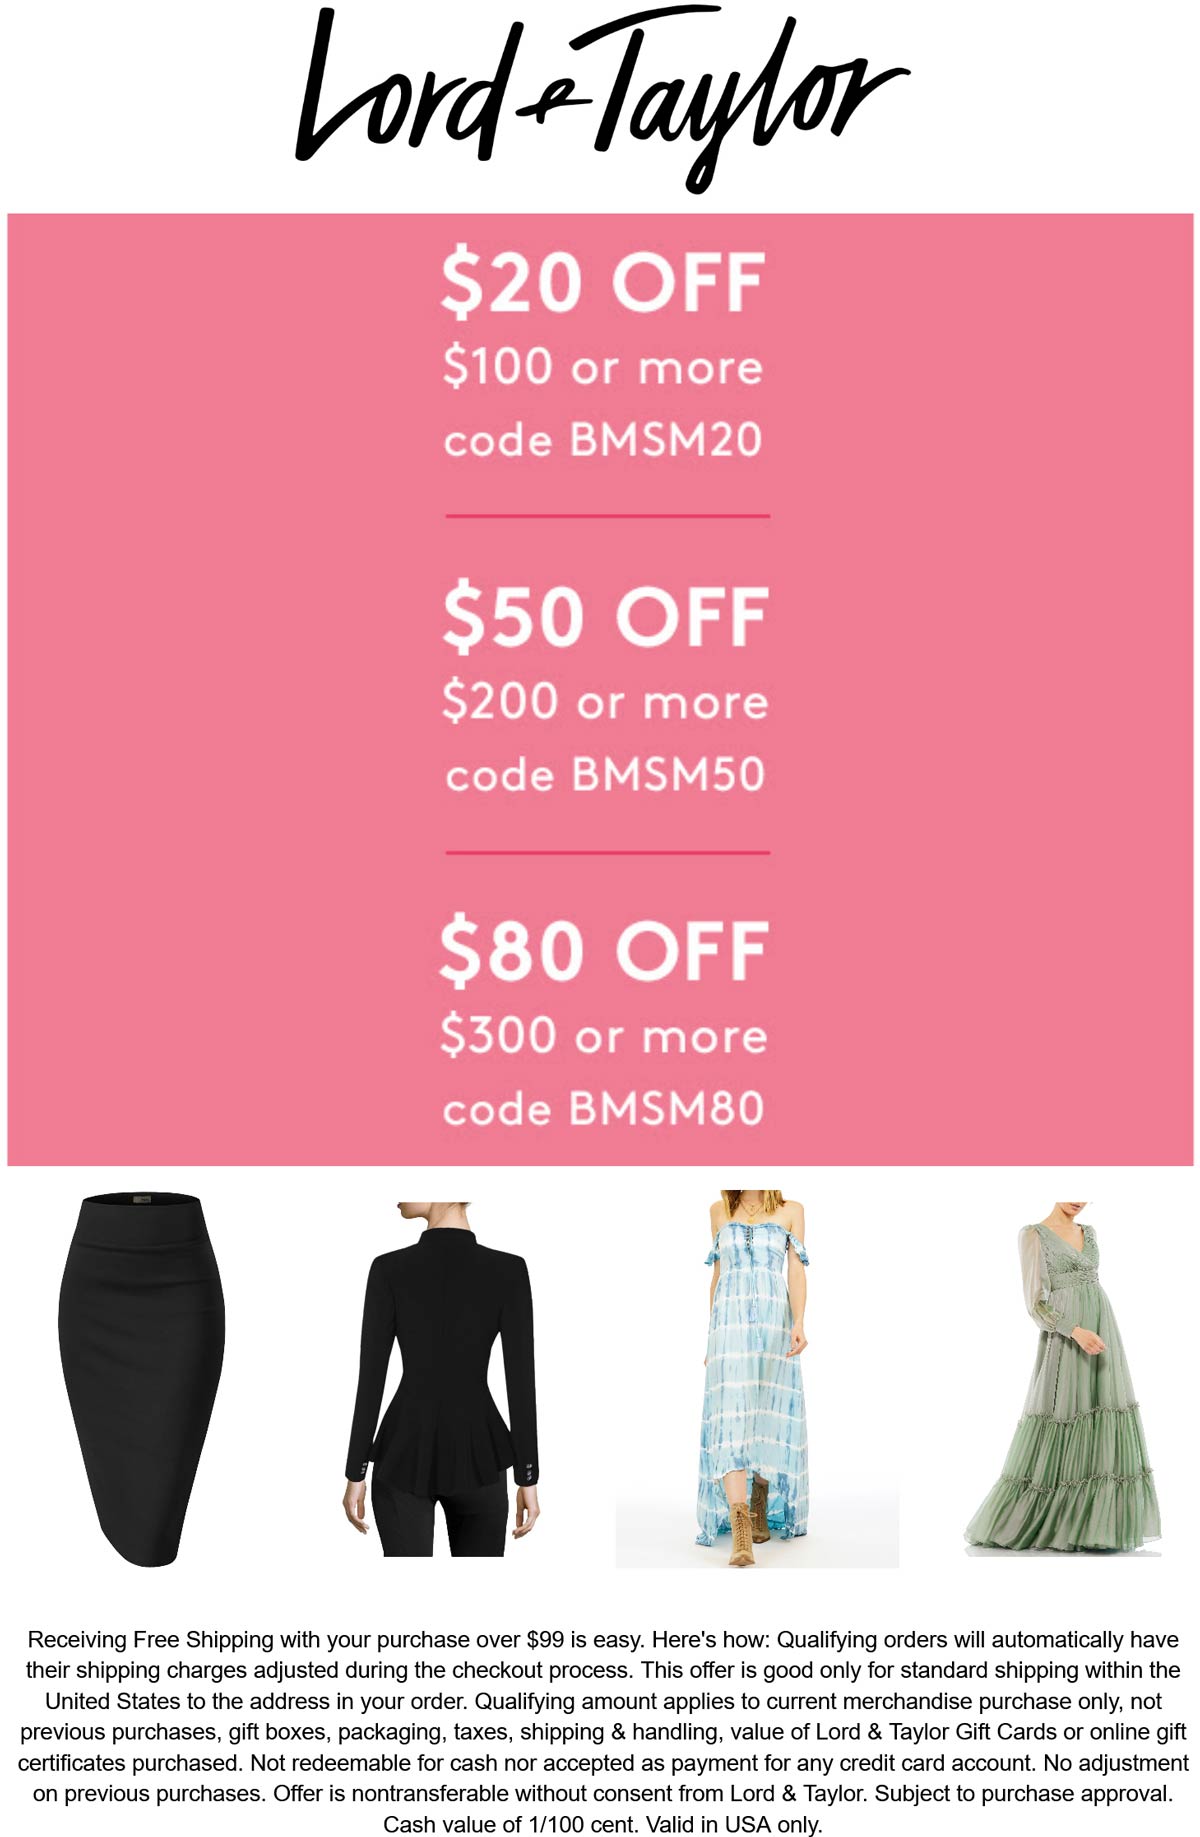 Lord & Taylor stores Coupon  $20-$80 off $100+ today at Lord & Taylor via promo code BMSM20 #lordtaylor 